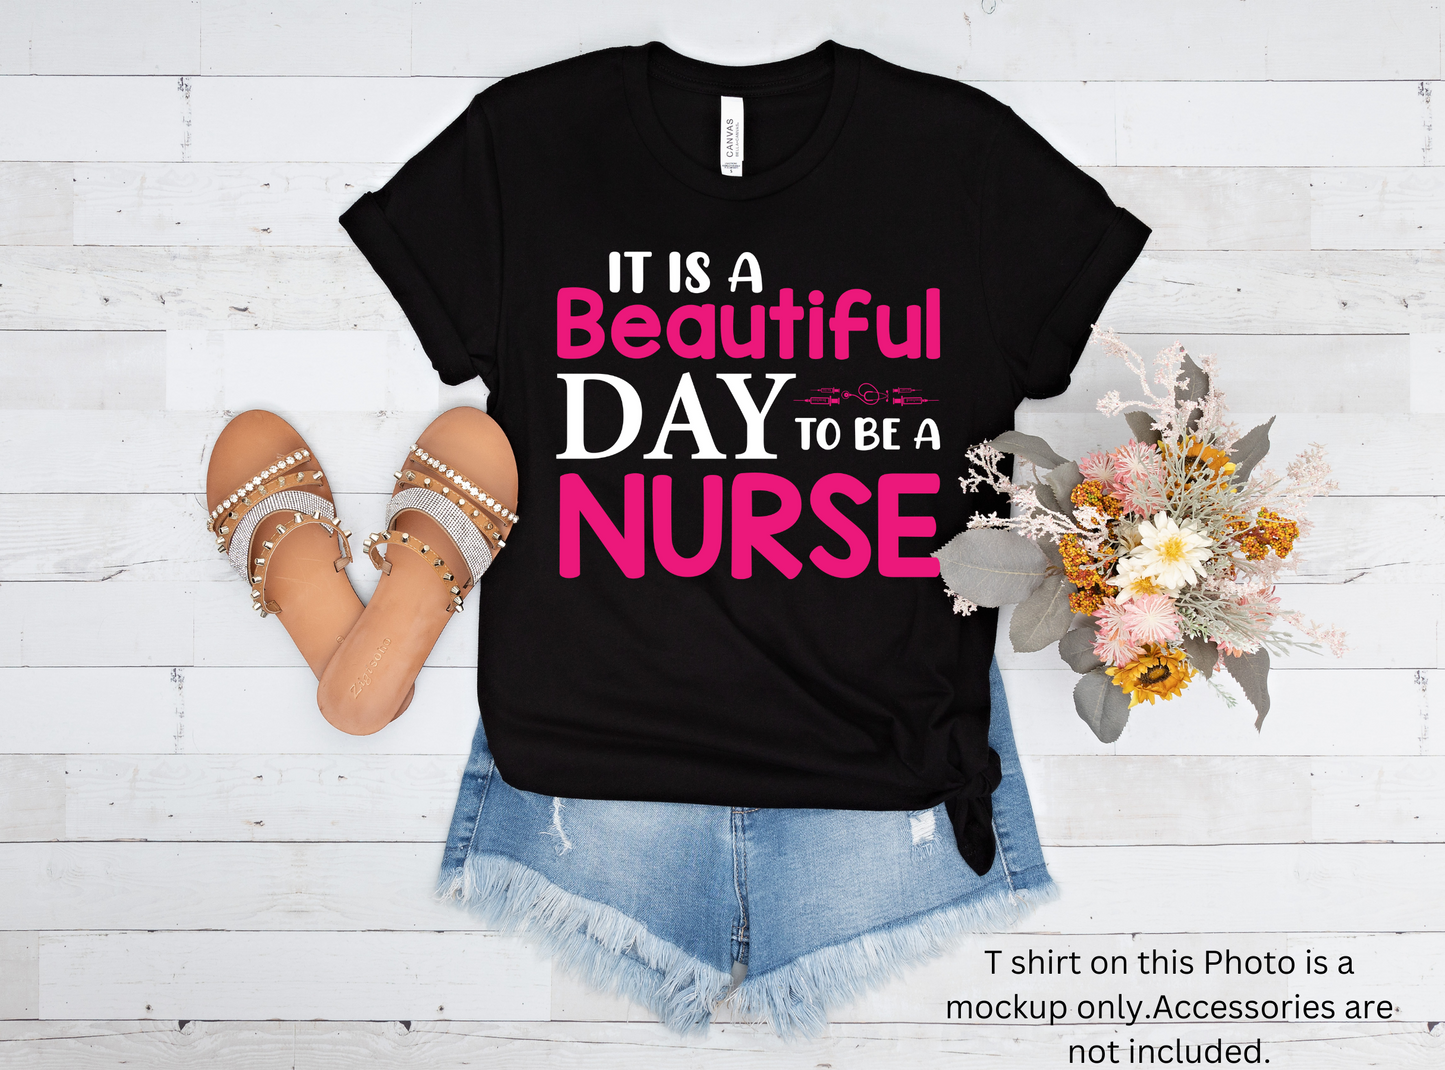 Beautiful Day to be a Nurse Women's Maple Tee